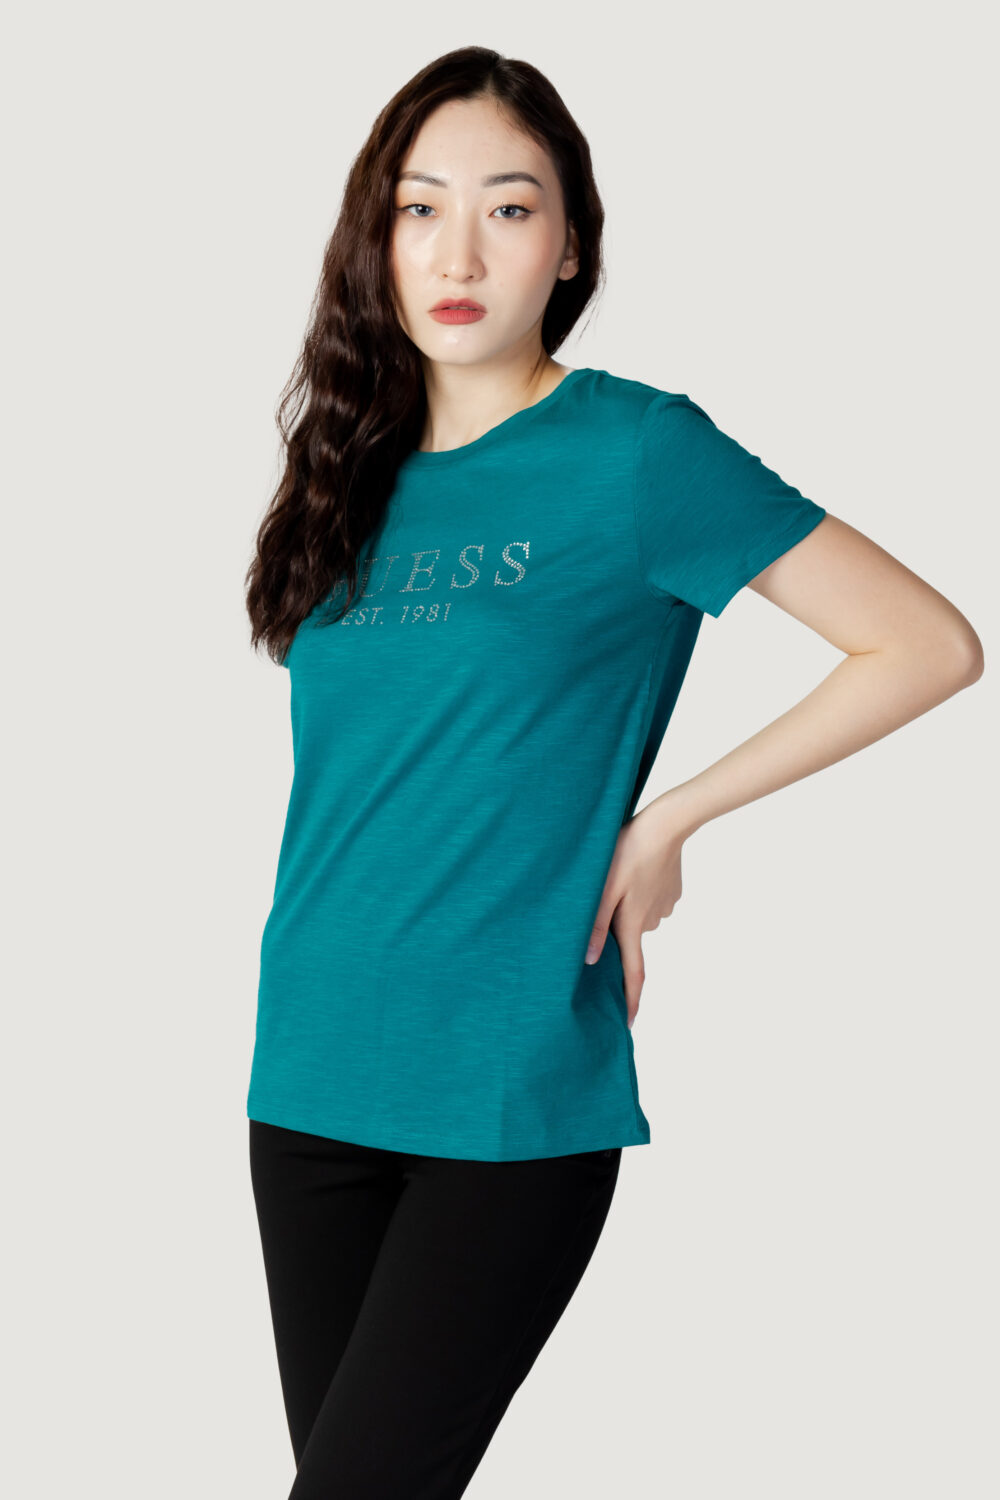 T-shirt Guess SS 1981 CRYSTAL EASY Verde - Foto 4